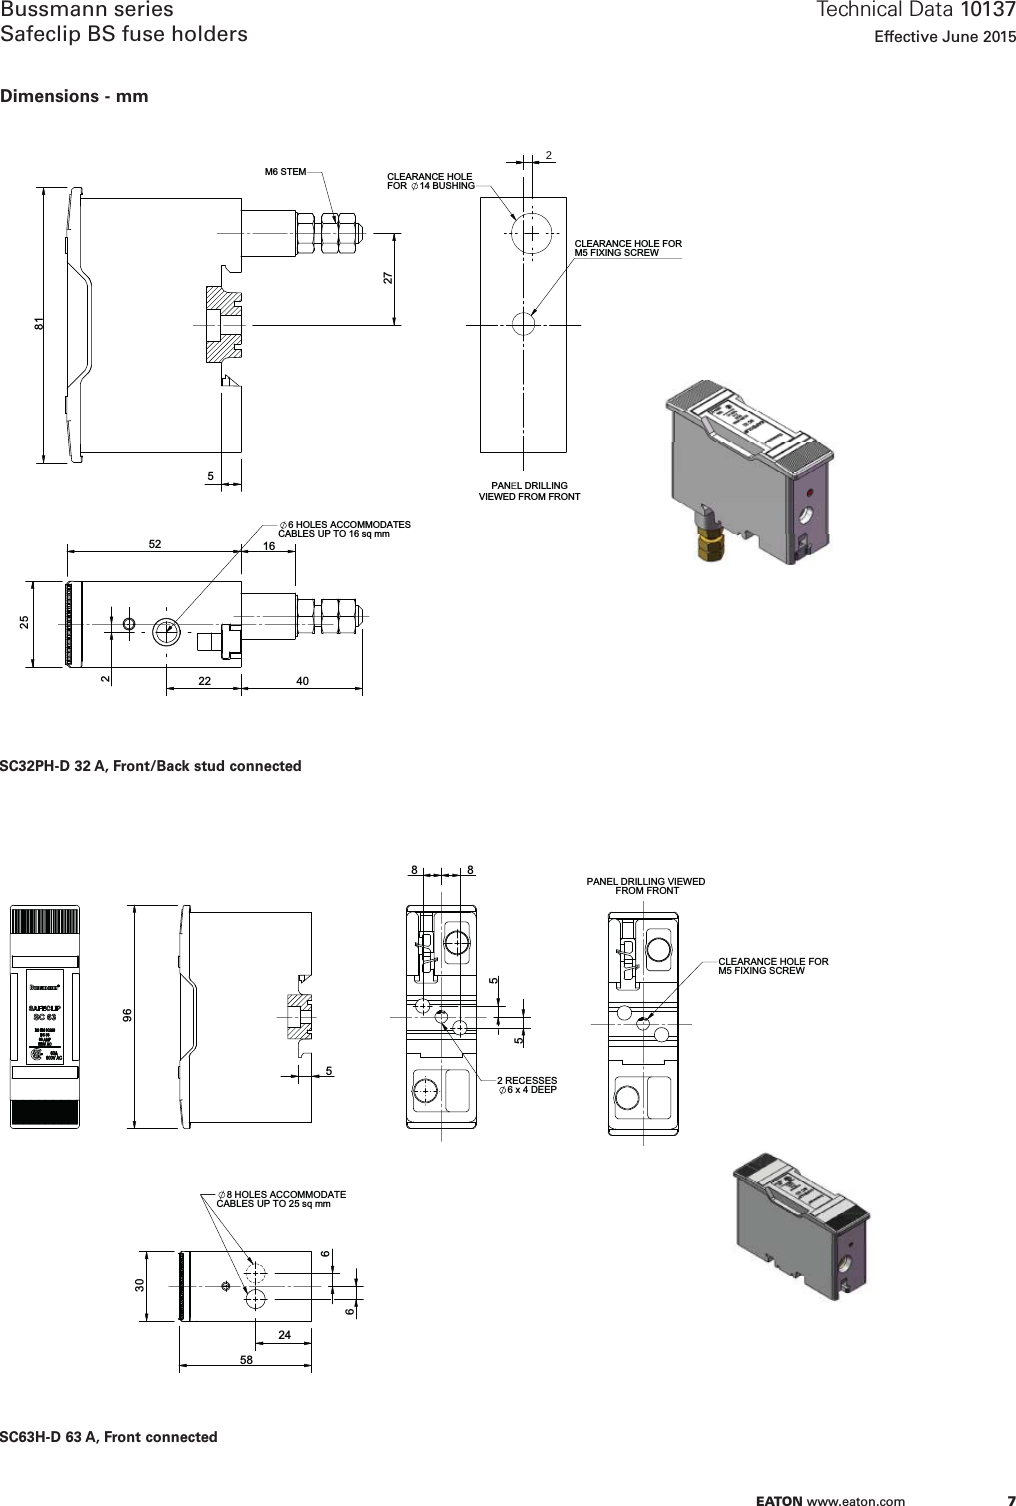 Page 7 of 10 - Bus-iec-ds-10137-safeclipfuseholders  Brochure